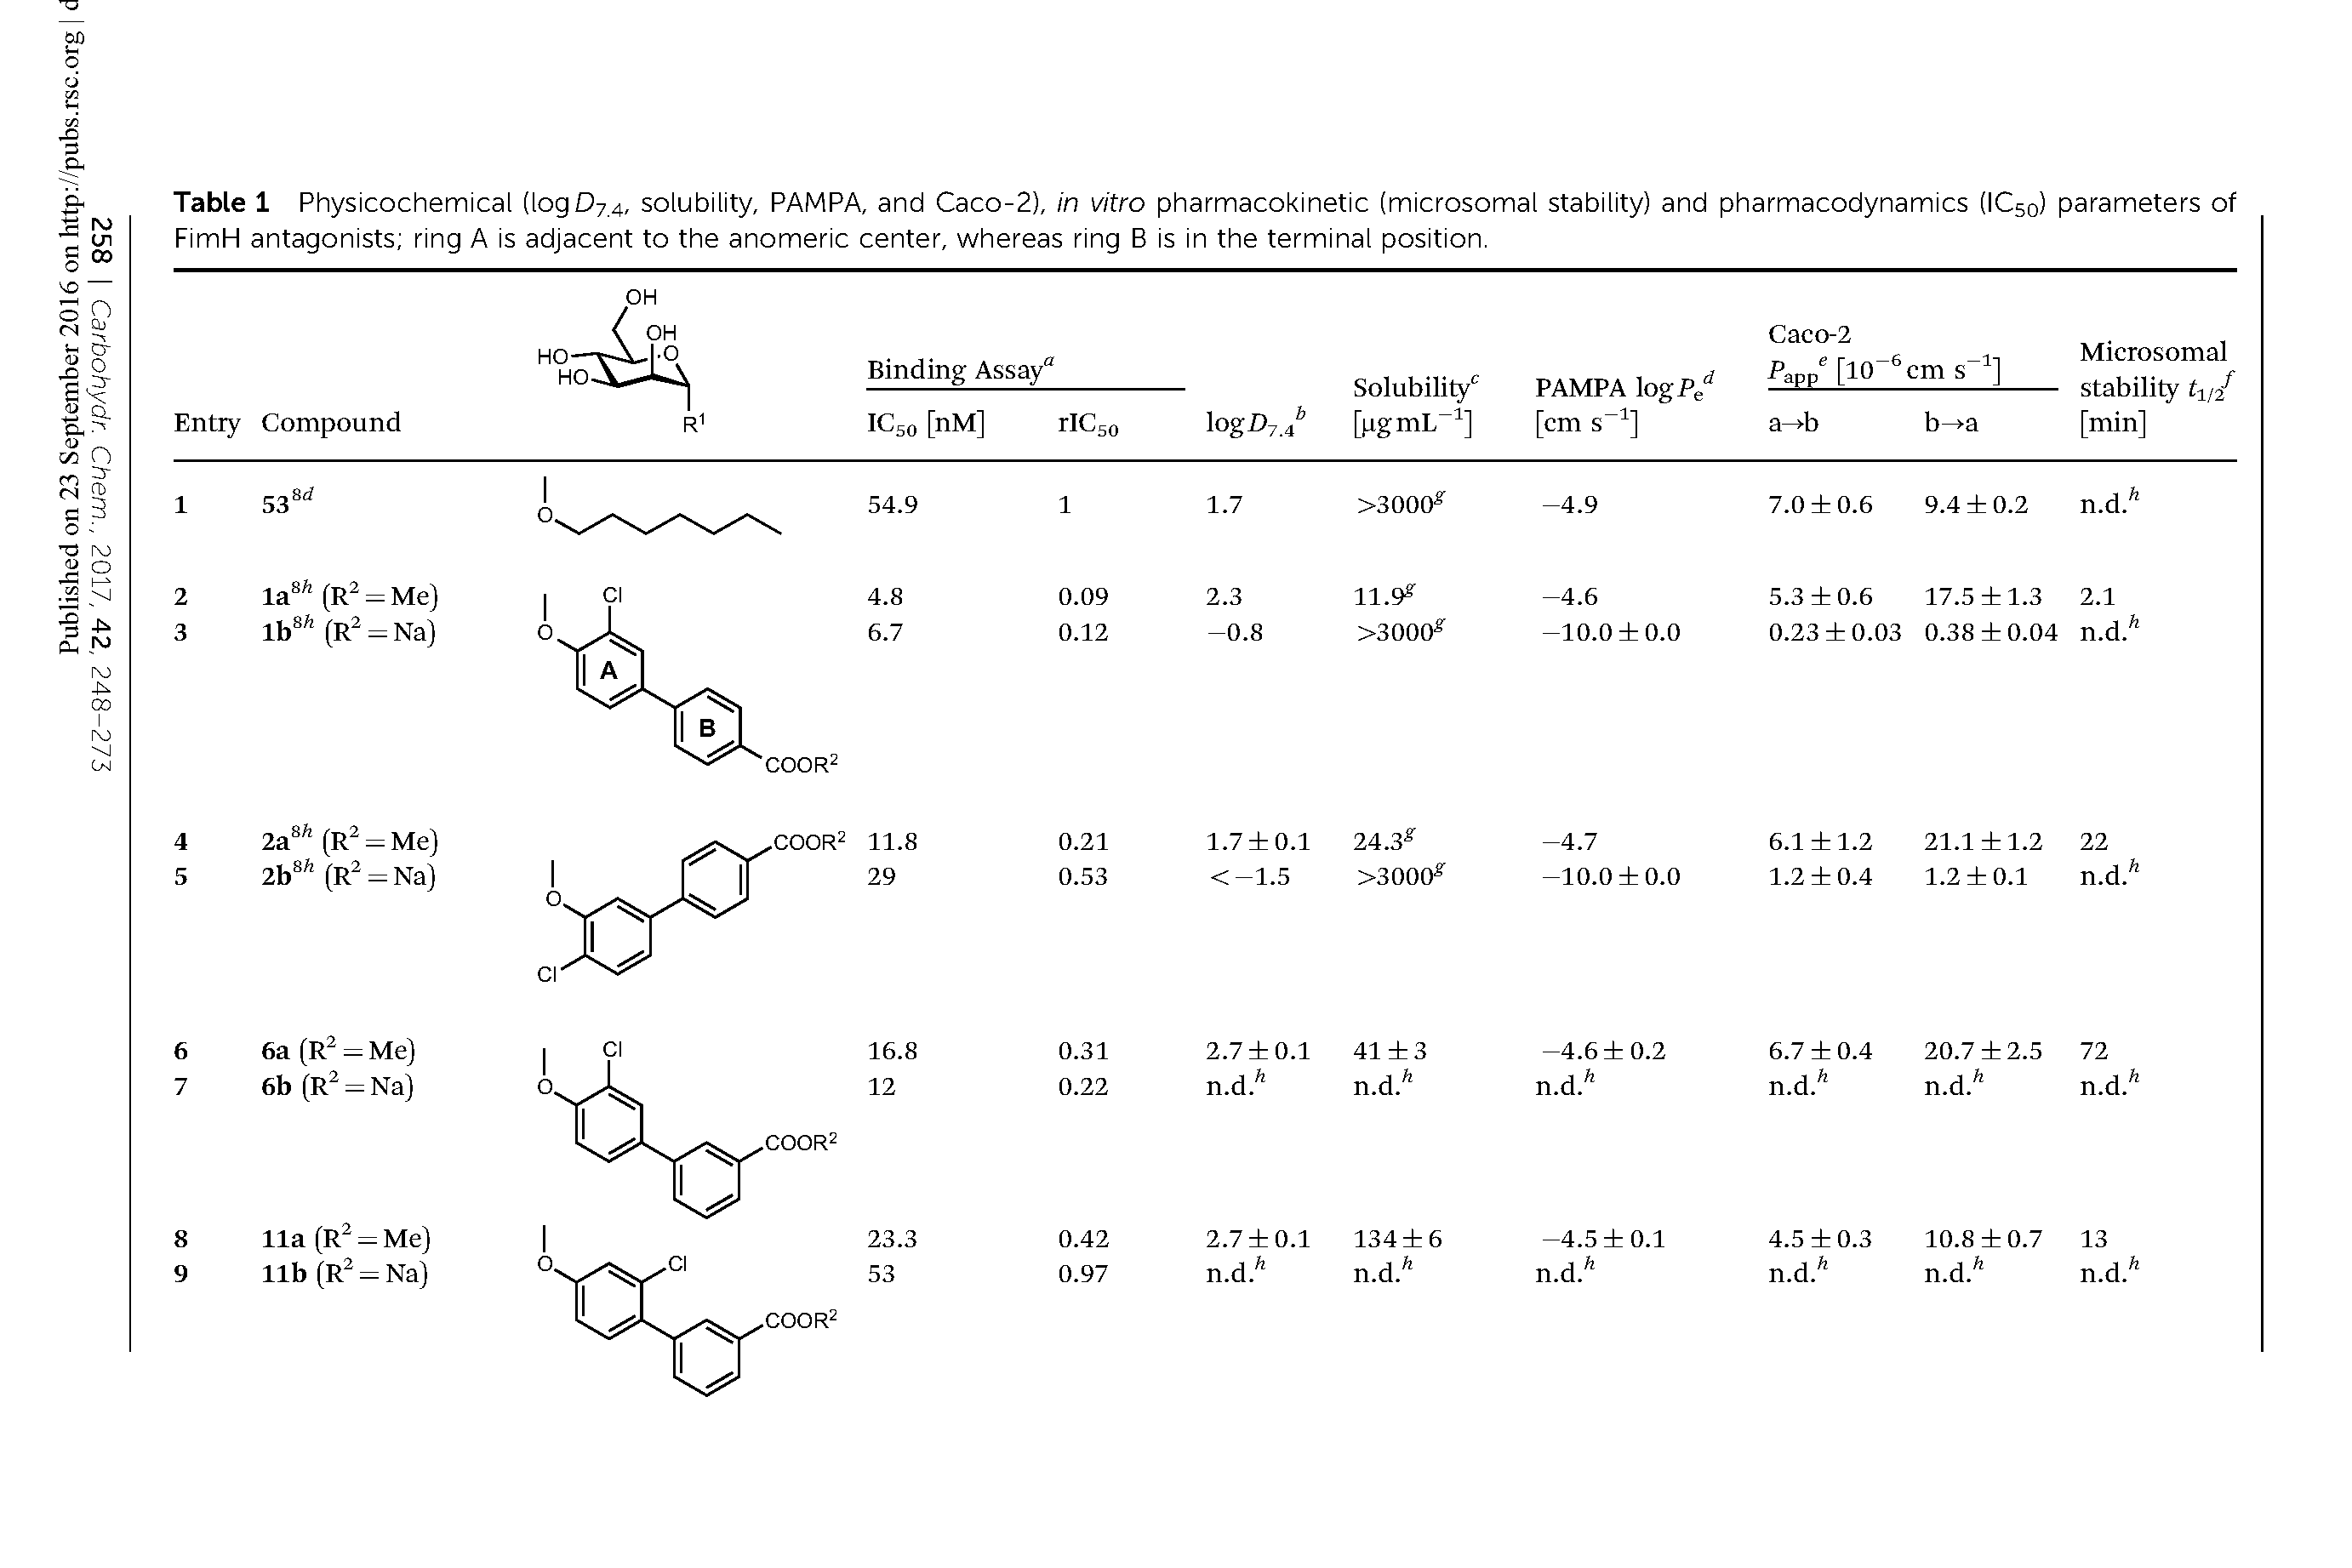 Table 1 Physicochemical (logD7 4, solubility, PAMPA, and Caco-2), in vitro pharmacokinetic (microsomal stability) and pharmacodynamics (IC50) parameters of FimH antagonists ring A is adjacent to the anomeric center, whereas ring B is in the terminal position.